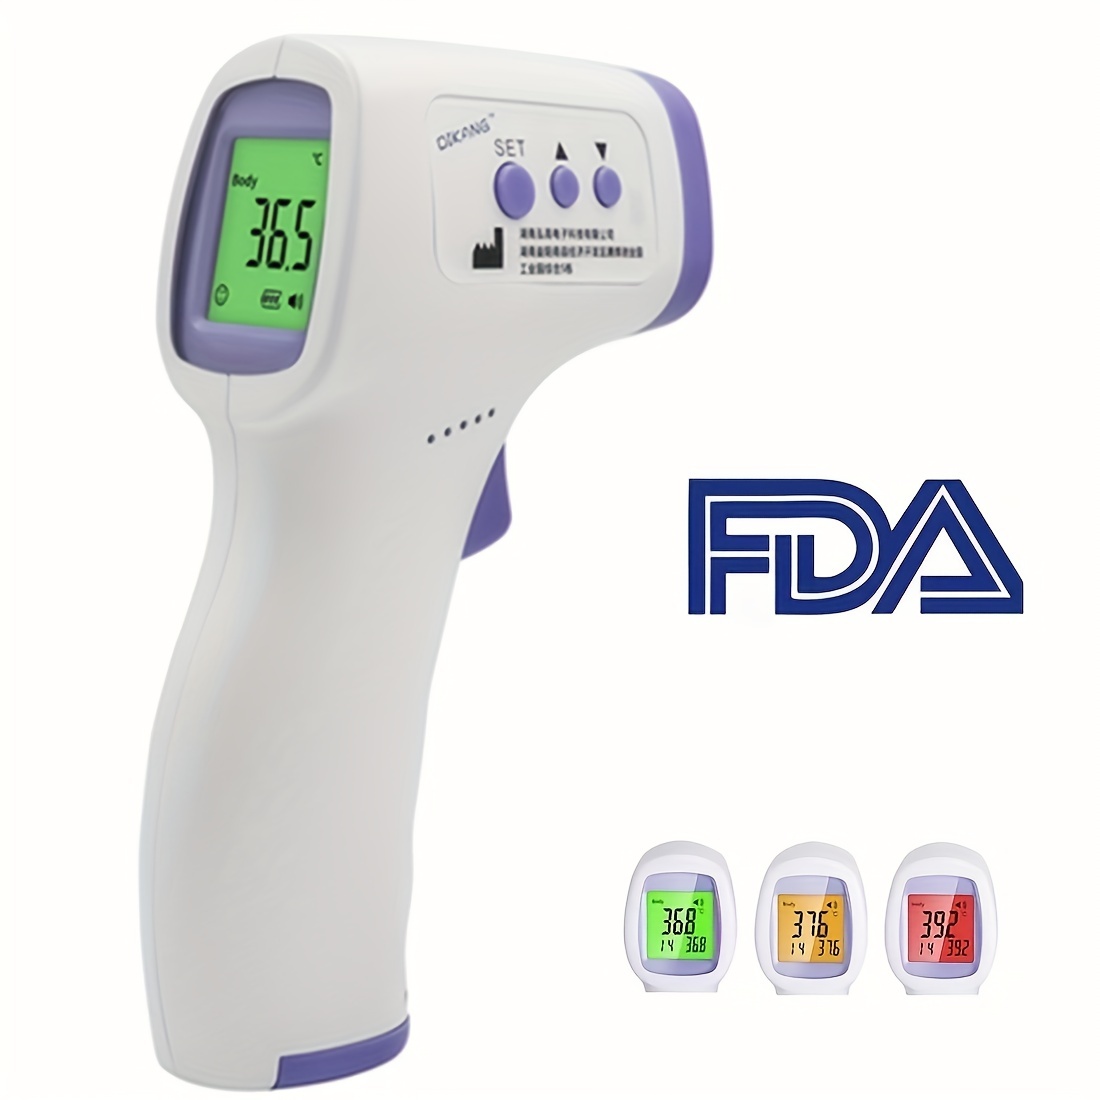 HTD8813C Non Contact Infrared Body Thermometer for Adults or Kids